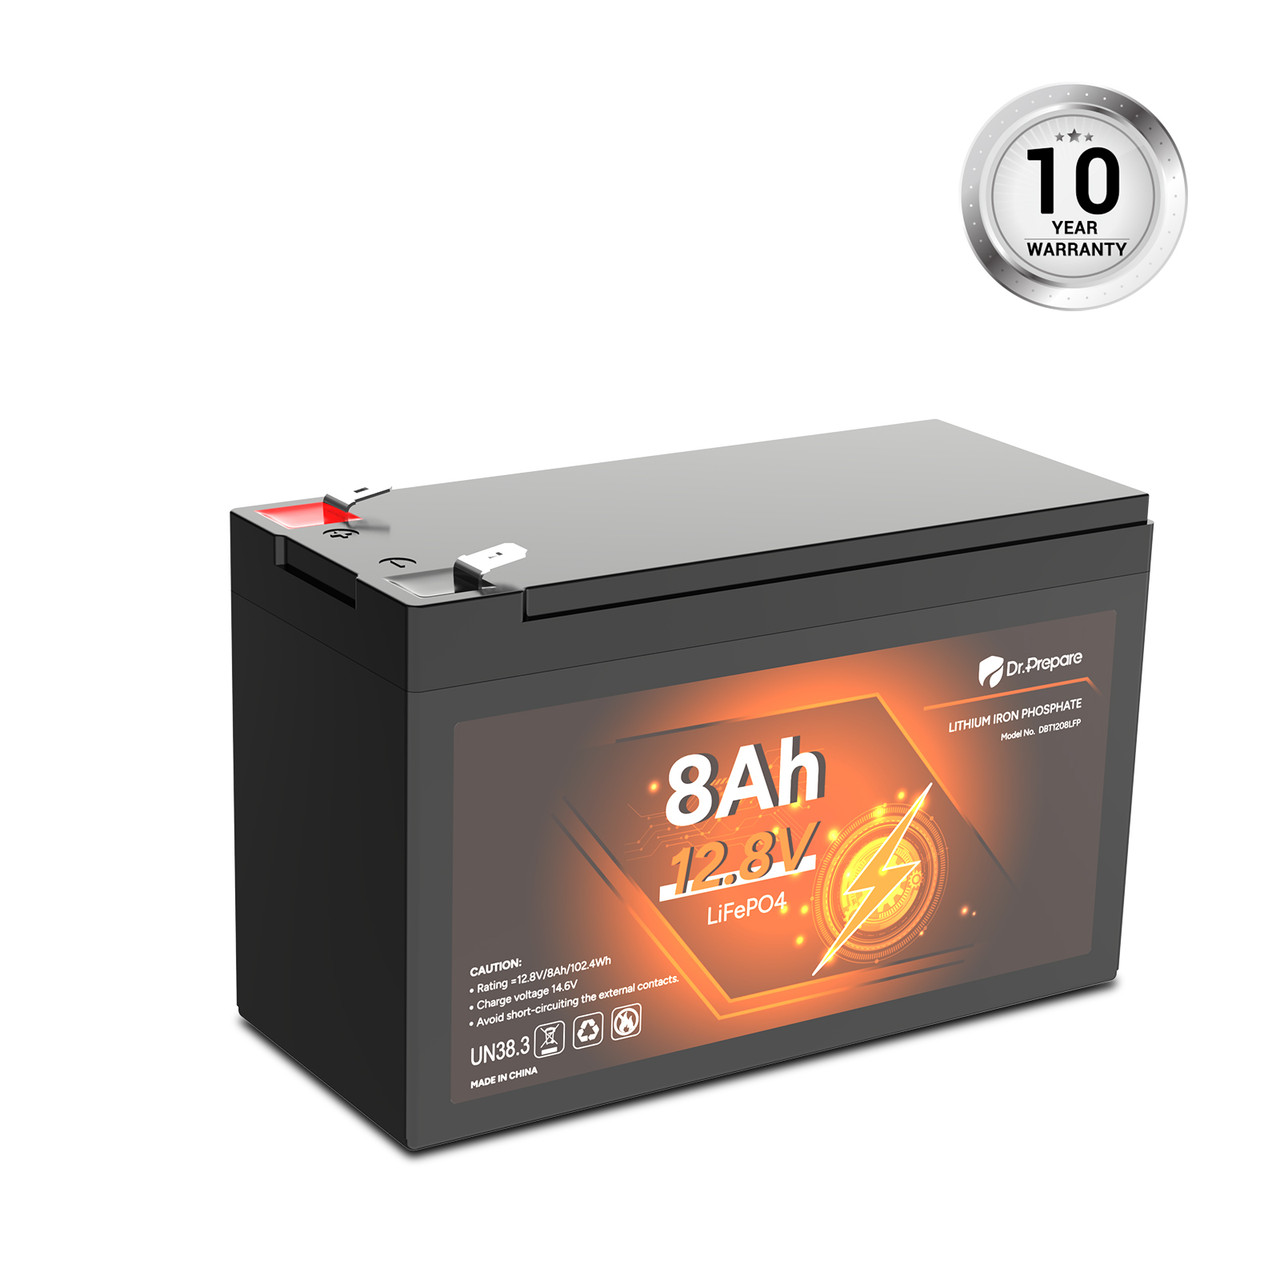 https://cdn11.bigcommerce.com/s-zlmvz0vwcm/images/stencil/1280x1280/products/307/3043/1-2_1-1_Dr.Prepare_12v_8ah_lithium_battery_with_10_year_warranty__46275.1704877056.jpg?c=2